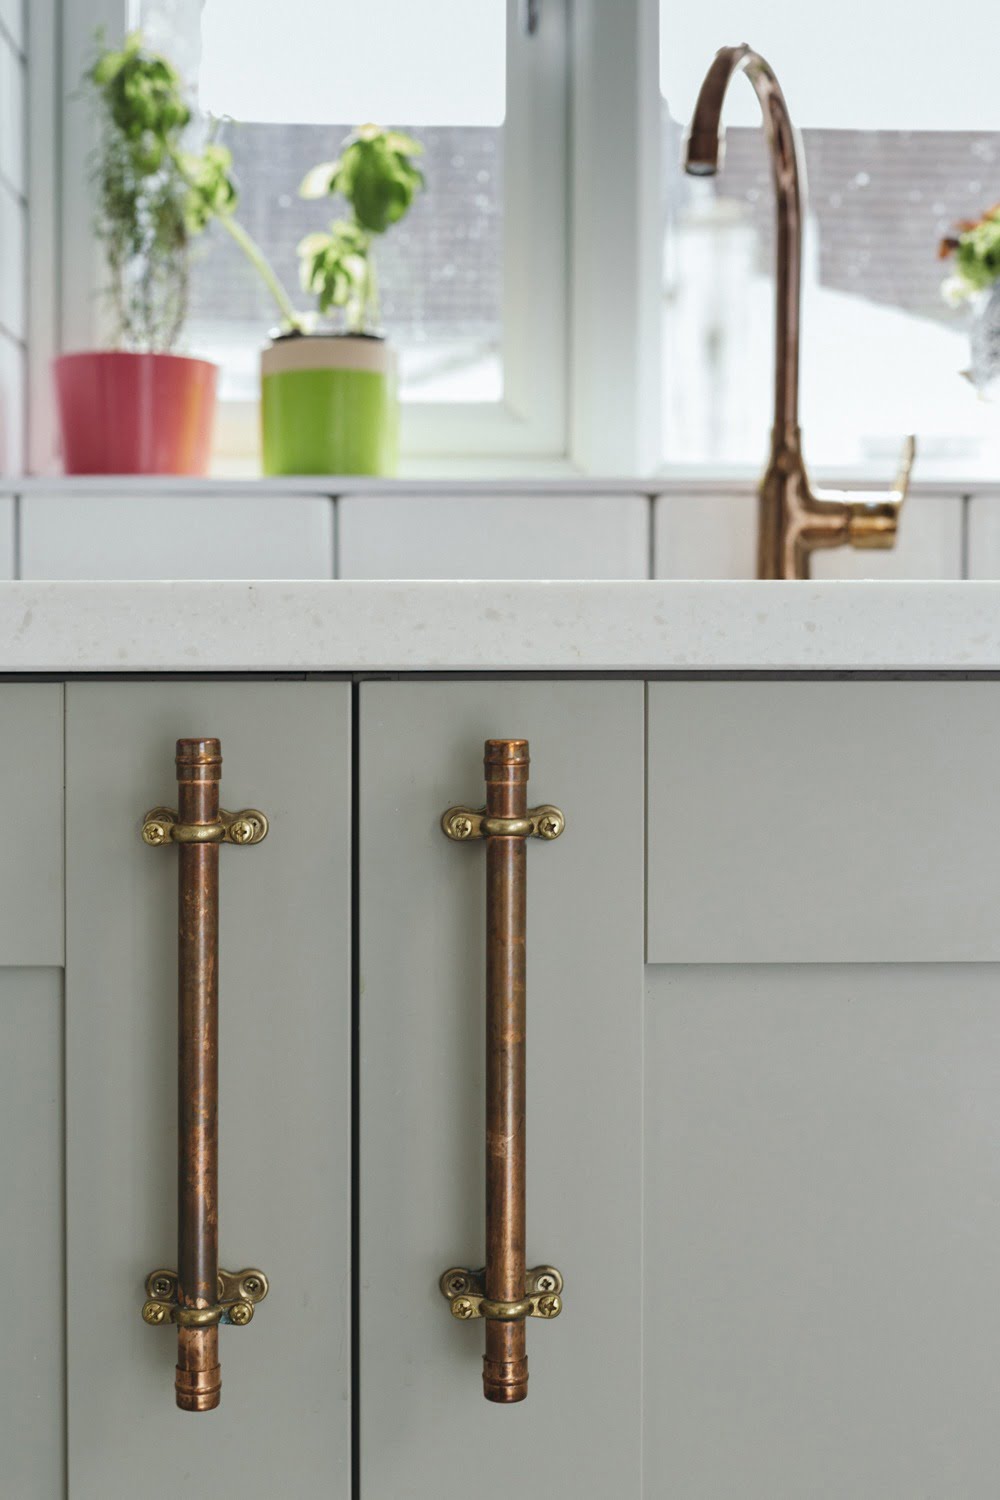 Essential Style Tips For Small Kitchens   Maxine Brady   Interior ...